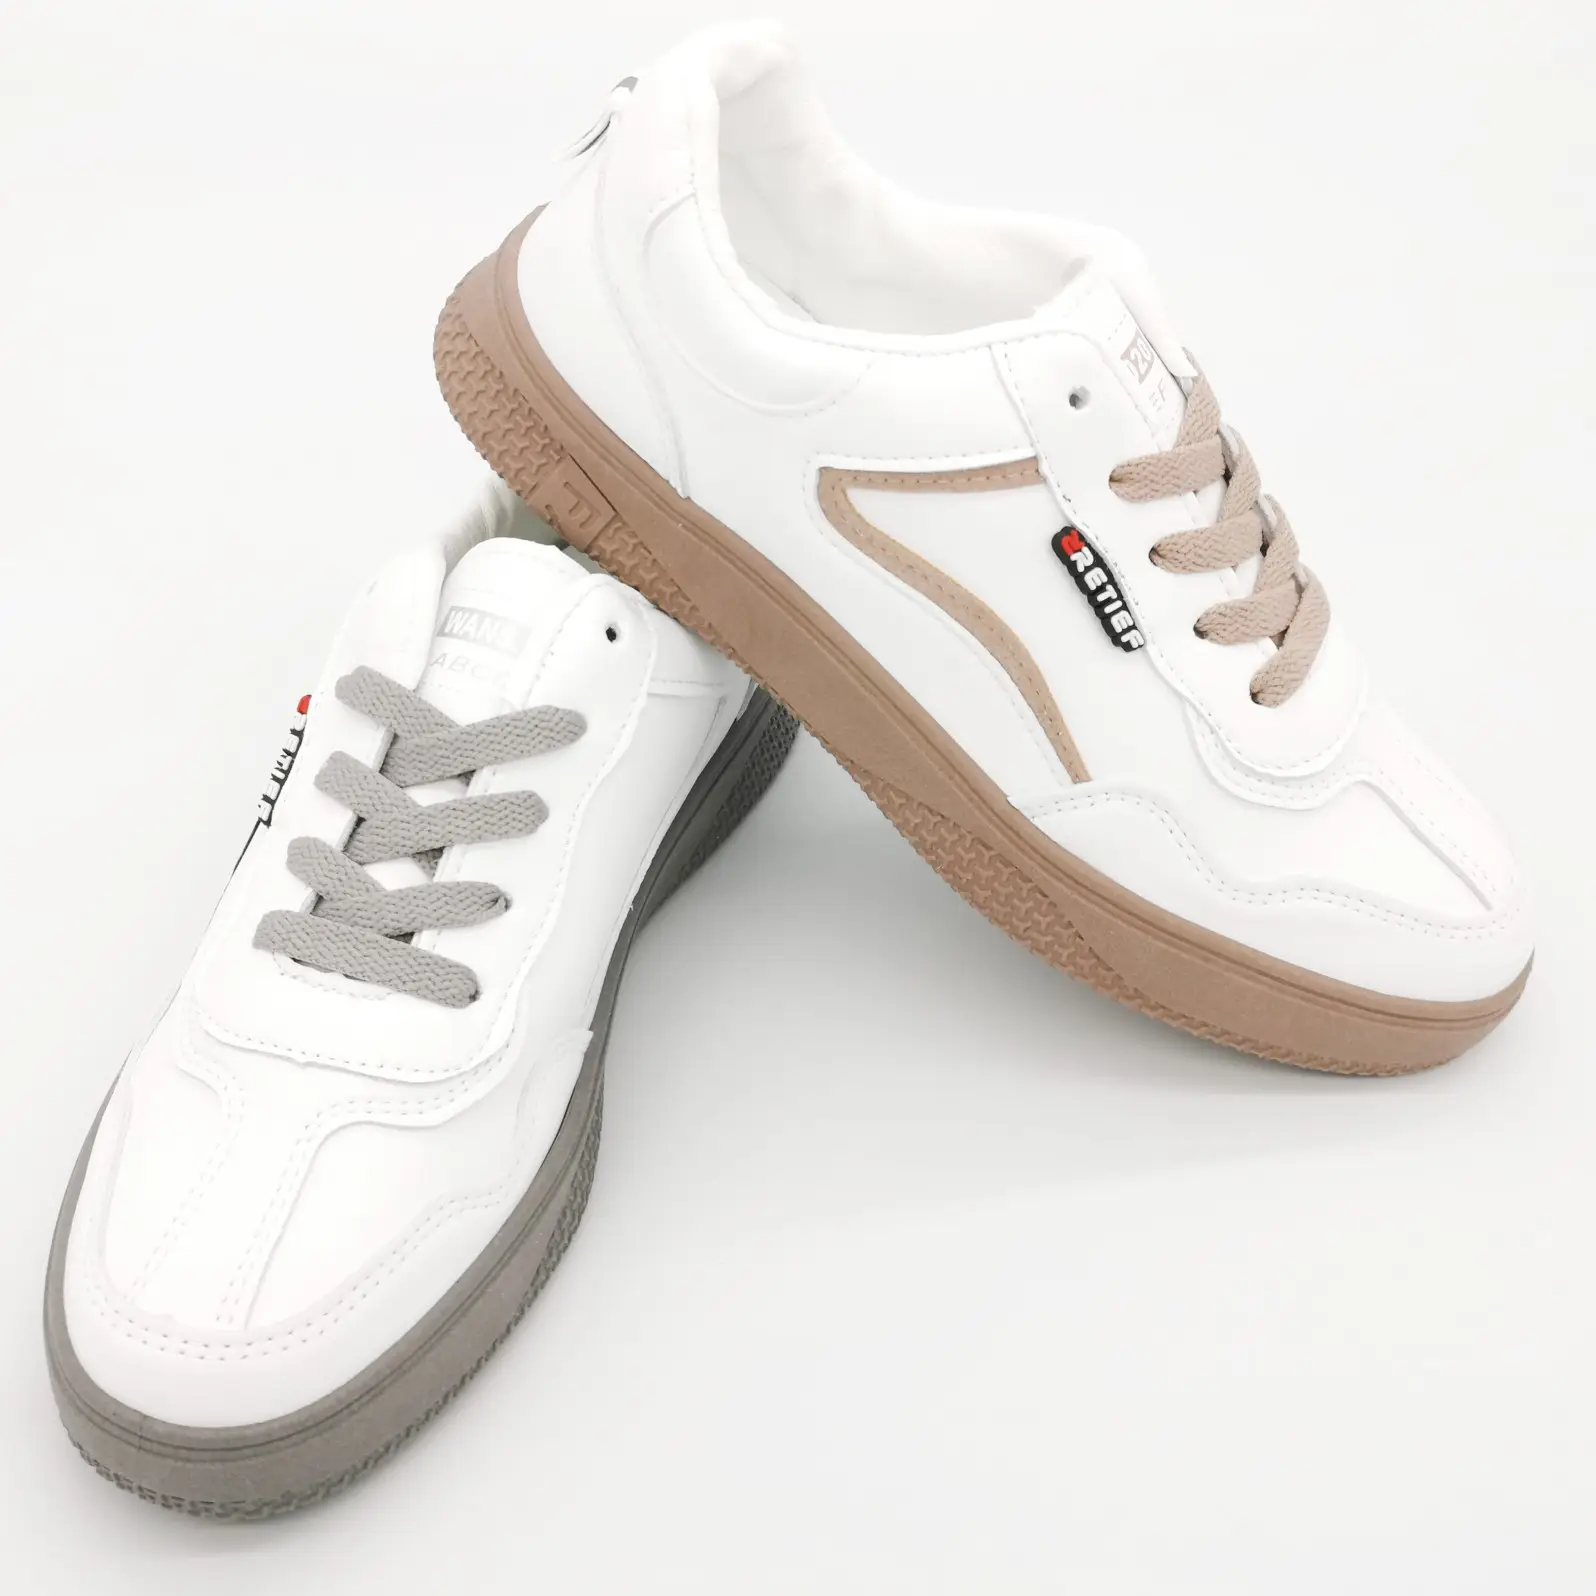 First class Lightweight Breathable Casual Sneakers for women white PU leather Women's Casual Shoes elegant dress woman shoes